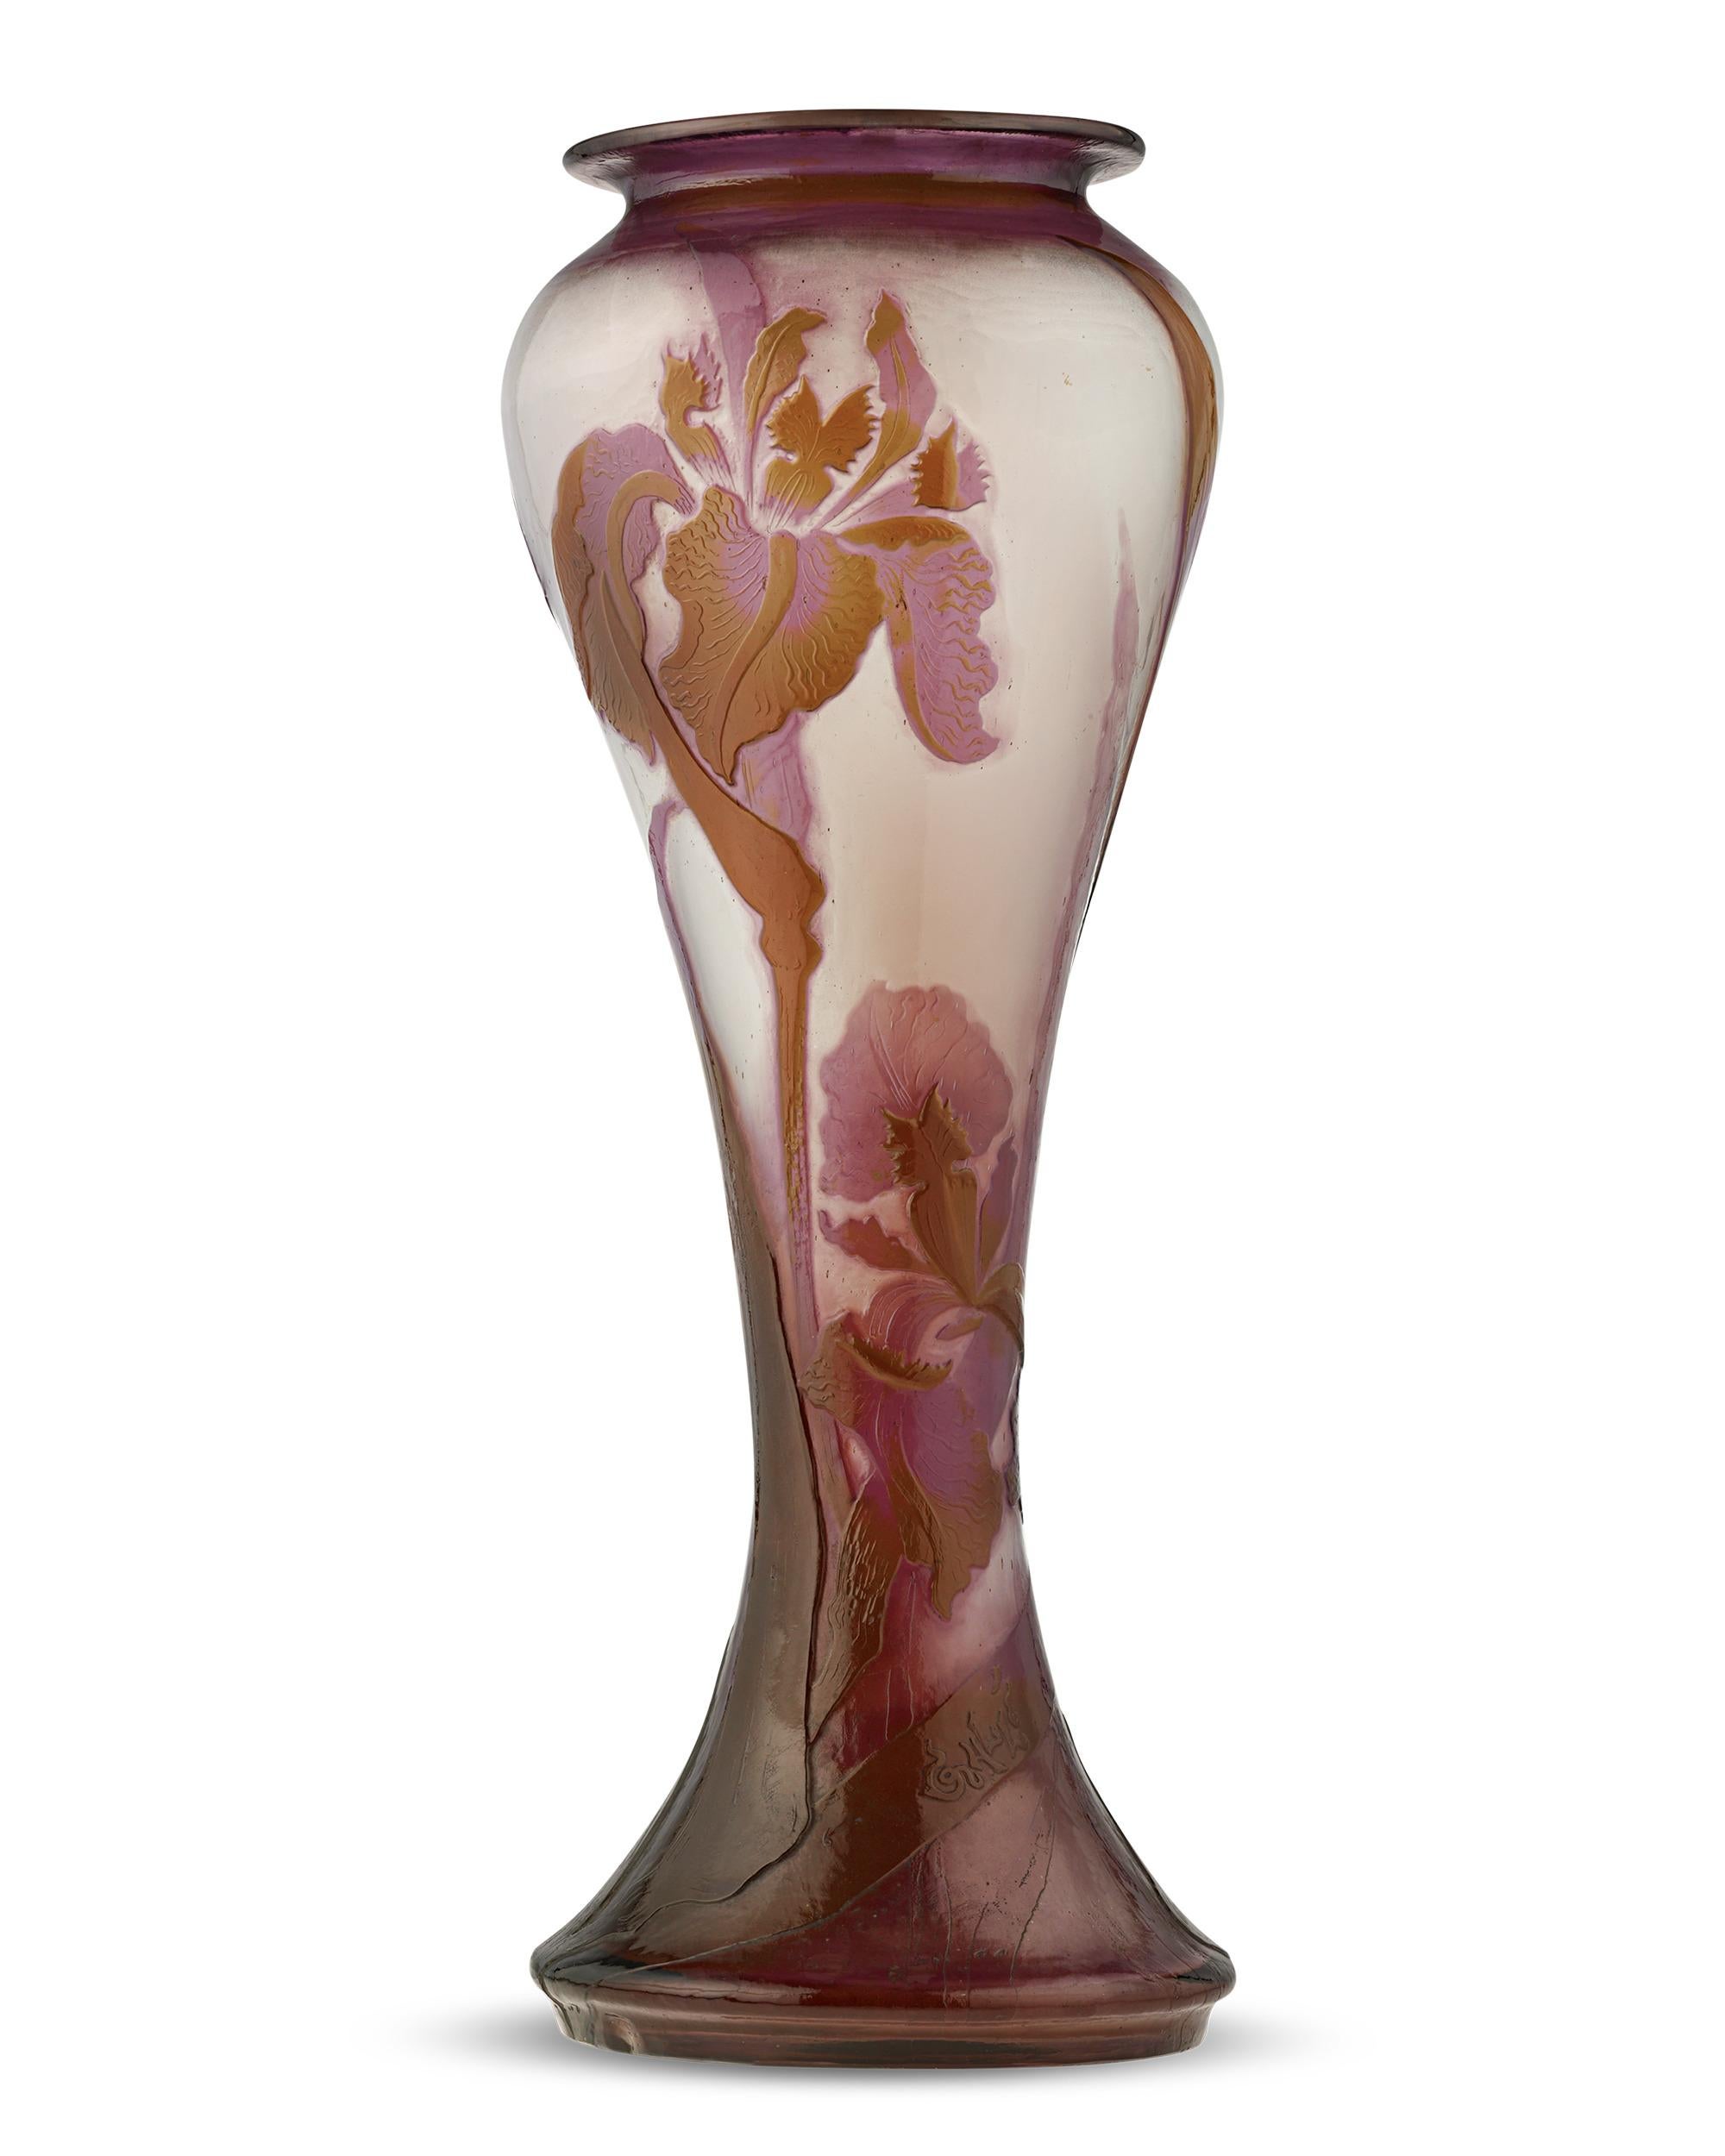 Exceptional in both size and artistry, this sand-polished cameo art glass vase is the work of the famed Art Nouveau master Émile Gallé, one of the most highly regarded names in French glassmaking. The artist's love of nature is evident in the